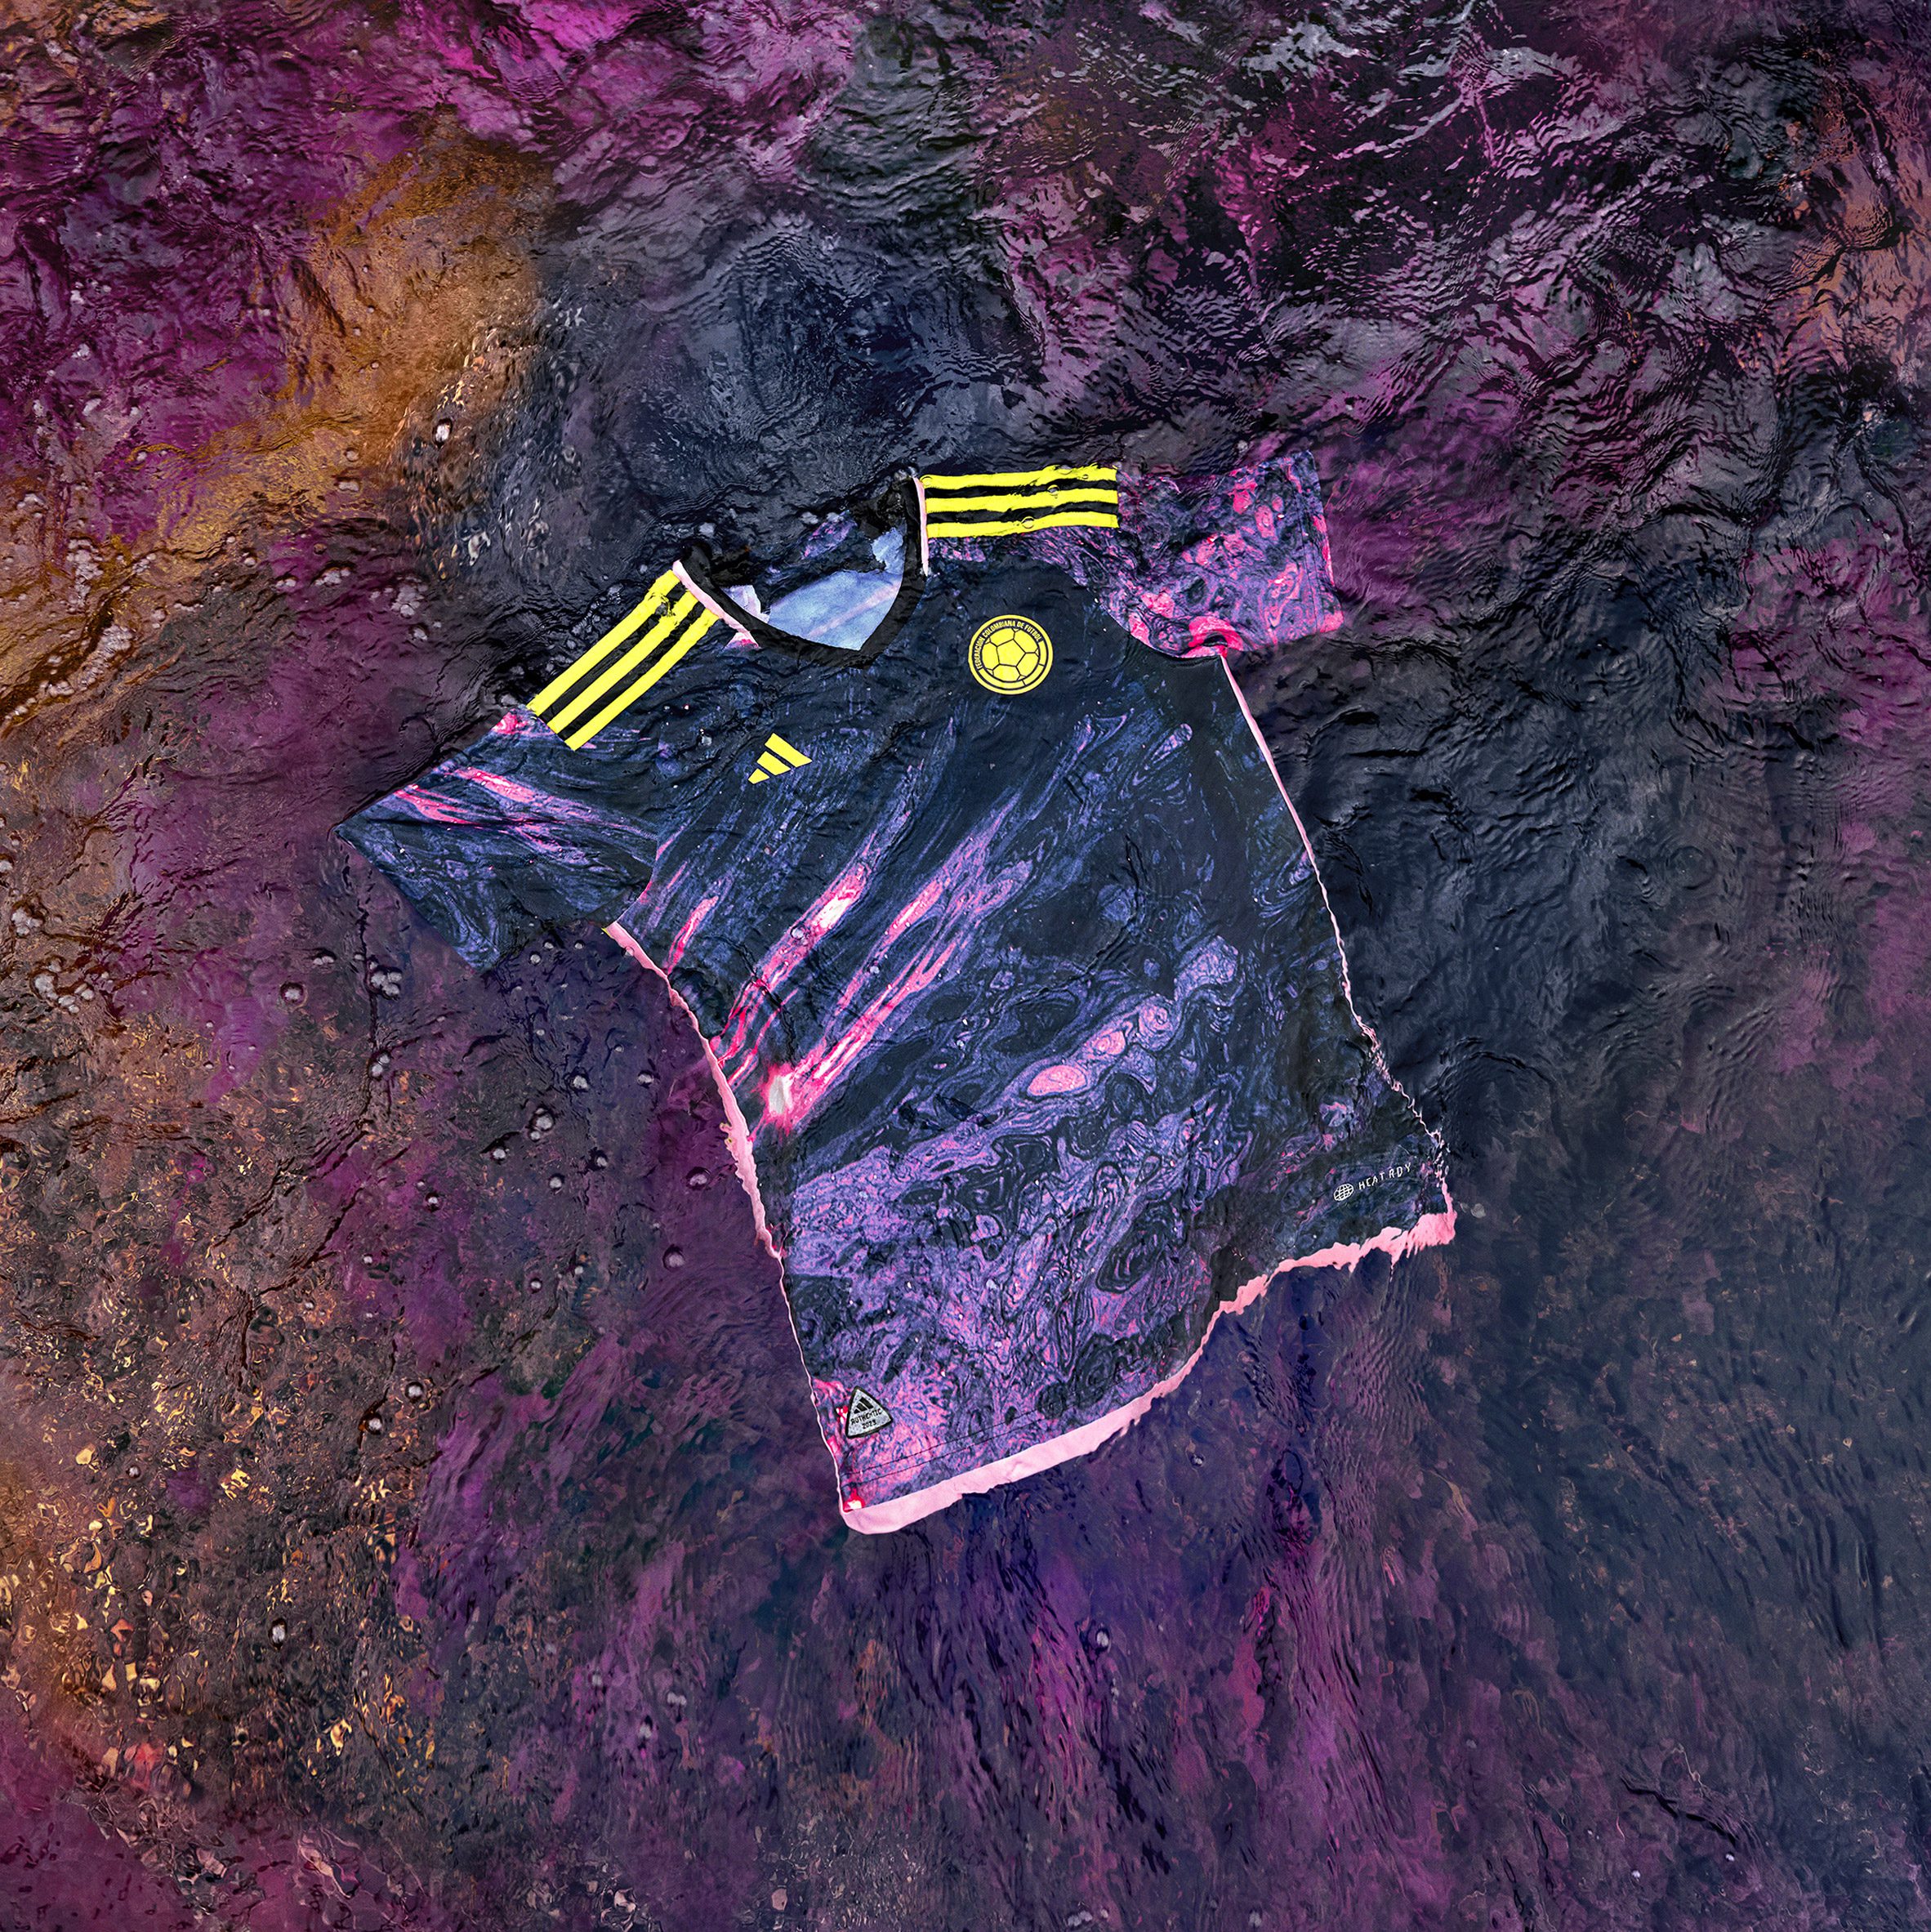 Colombia Women's World Cup kit by Adidas